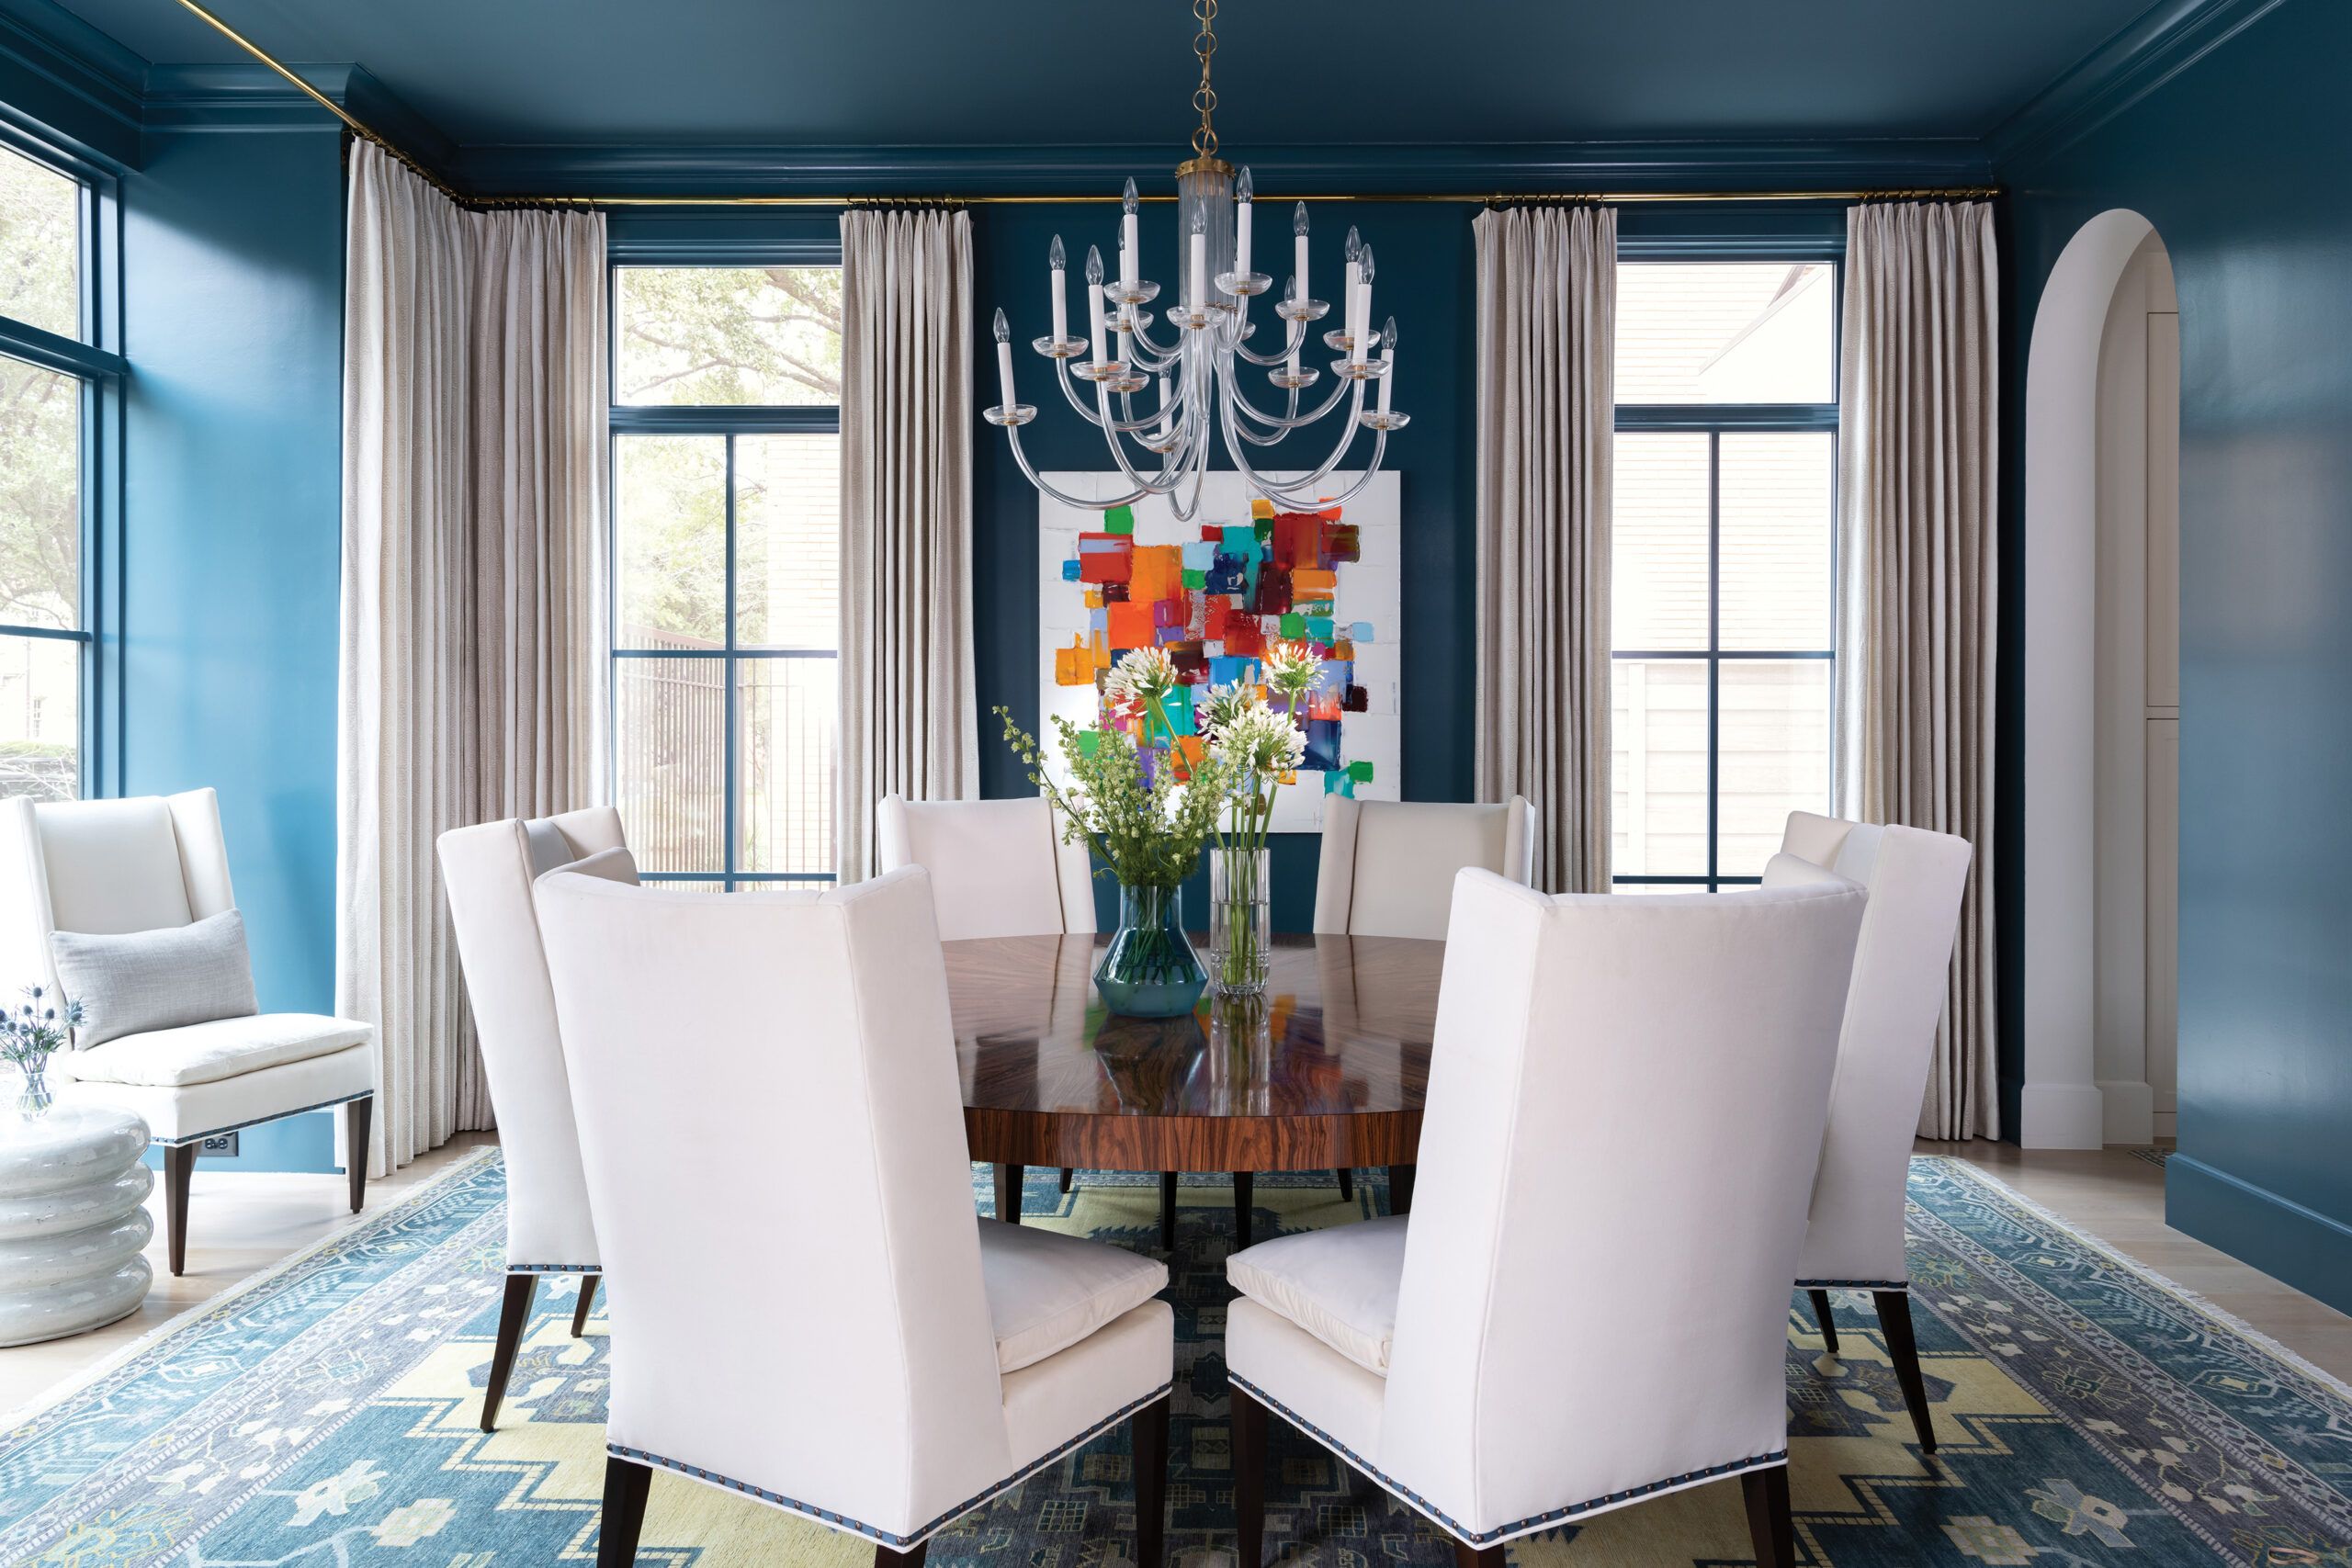 Interior Color Selection Tips for Your Home